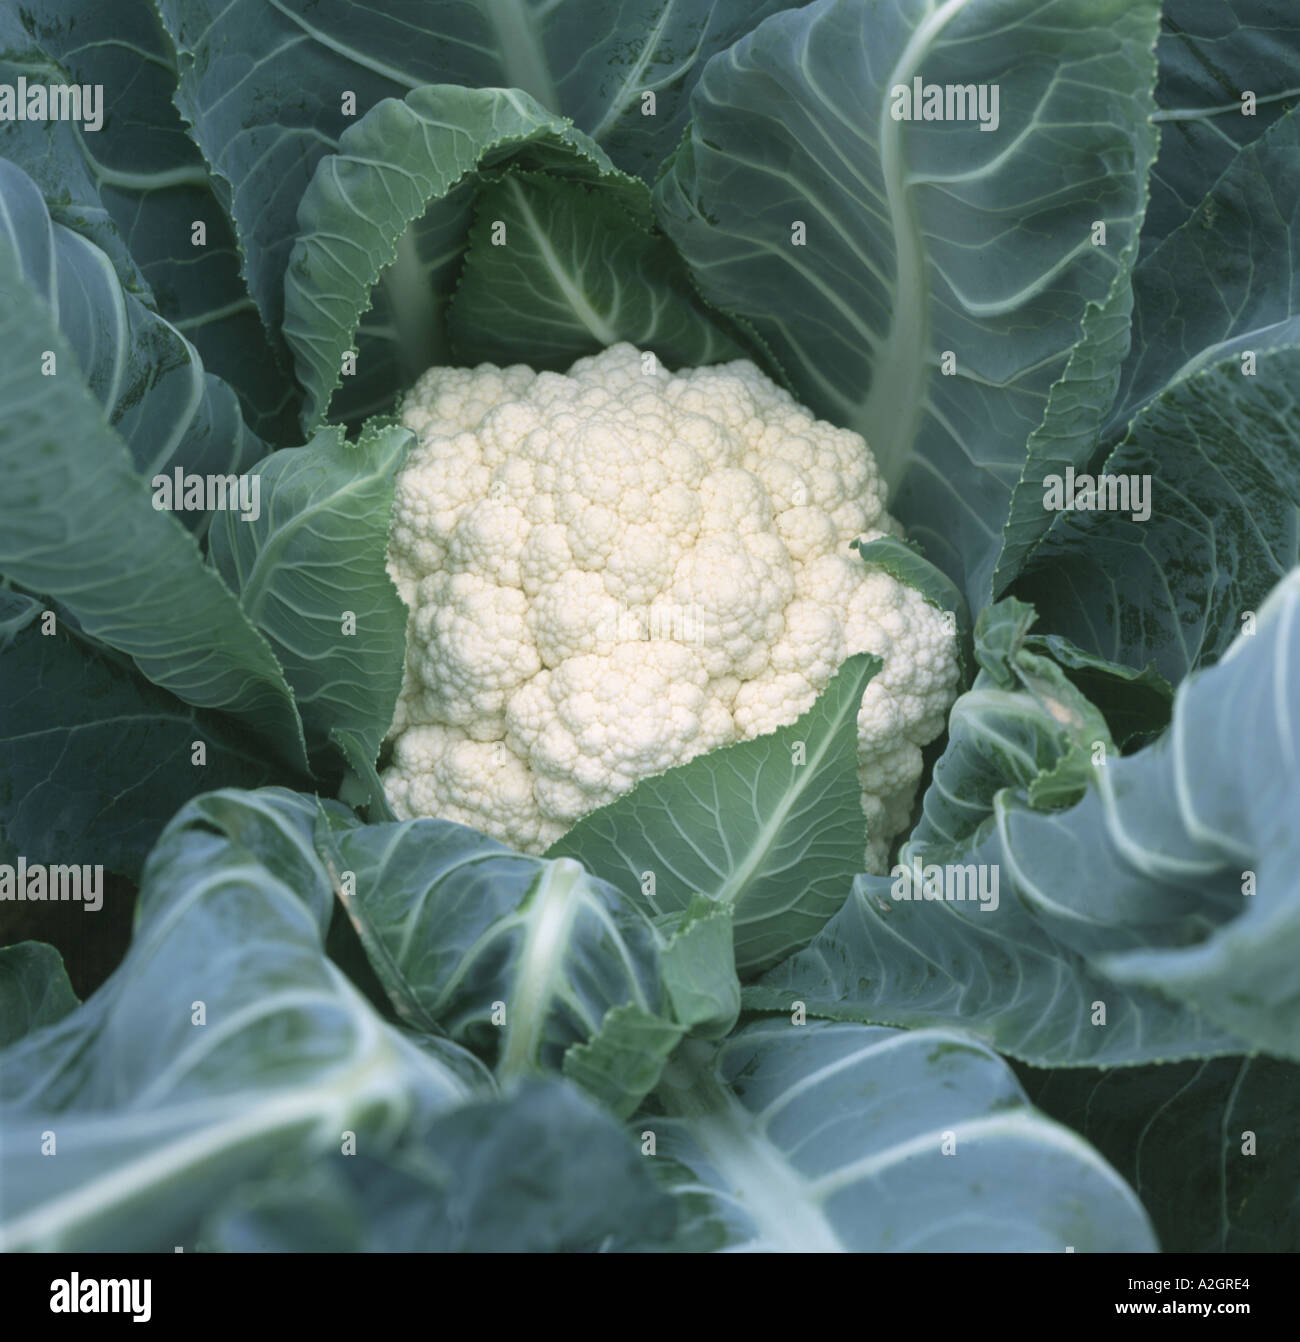 A cauliflower Brassica oleracea v botrytis head ready for harvest with clean white curd Stock Photo